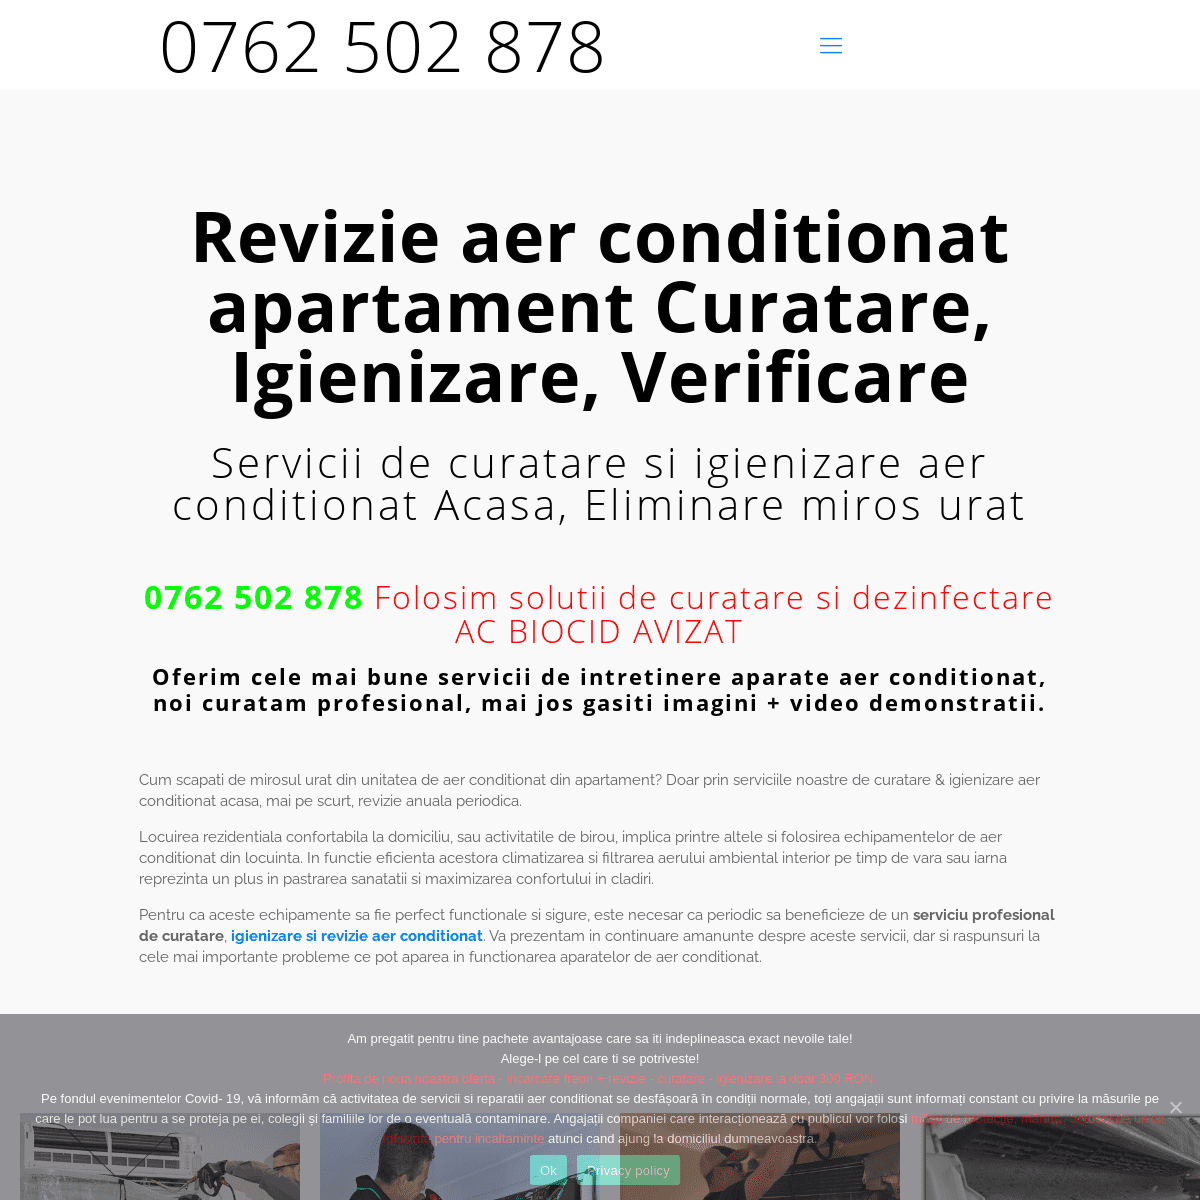 A complete backup of https://aerconditionate.ro